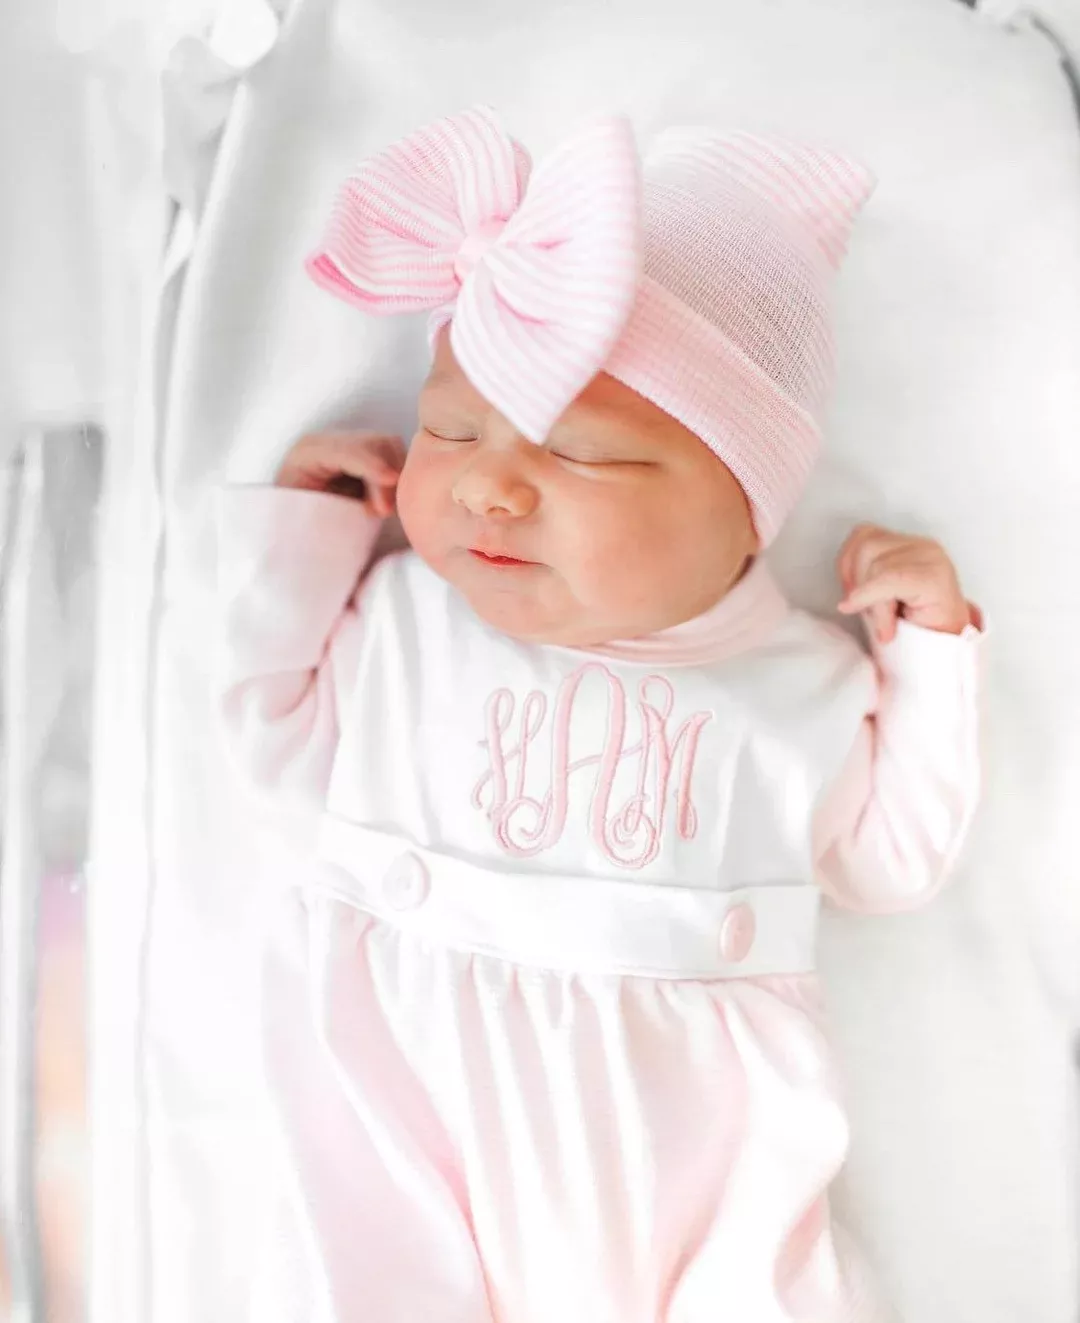 Newborn Outfits Baby Coming Home Outfit Going Home Outit Baby Outfit